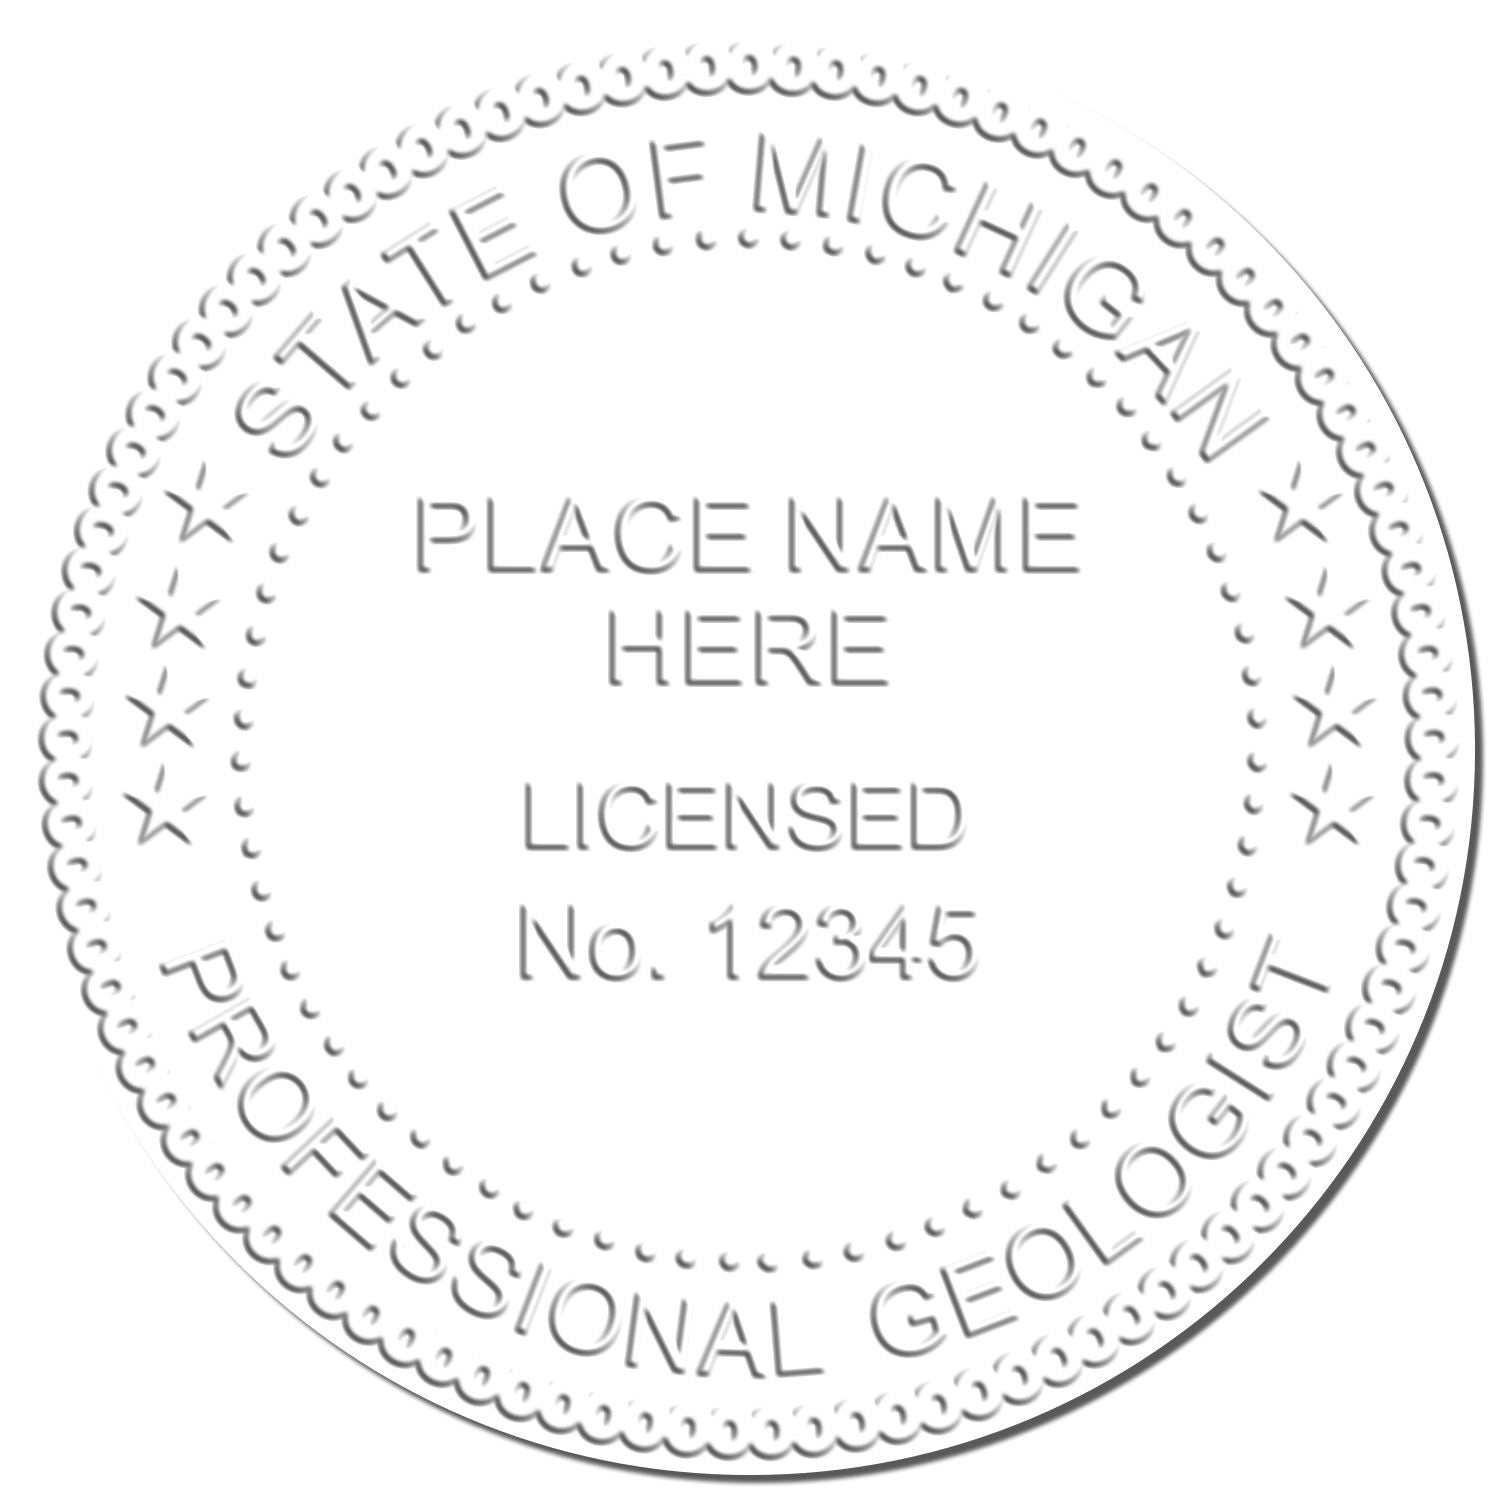 The Michigan Geologist Desk Seal stamp impression comes to life with a crisp, detailed image stamped on paper - showcasing true professional quality.